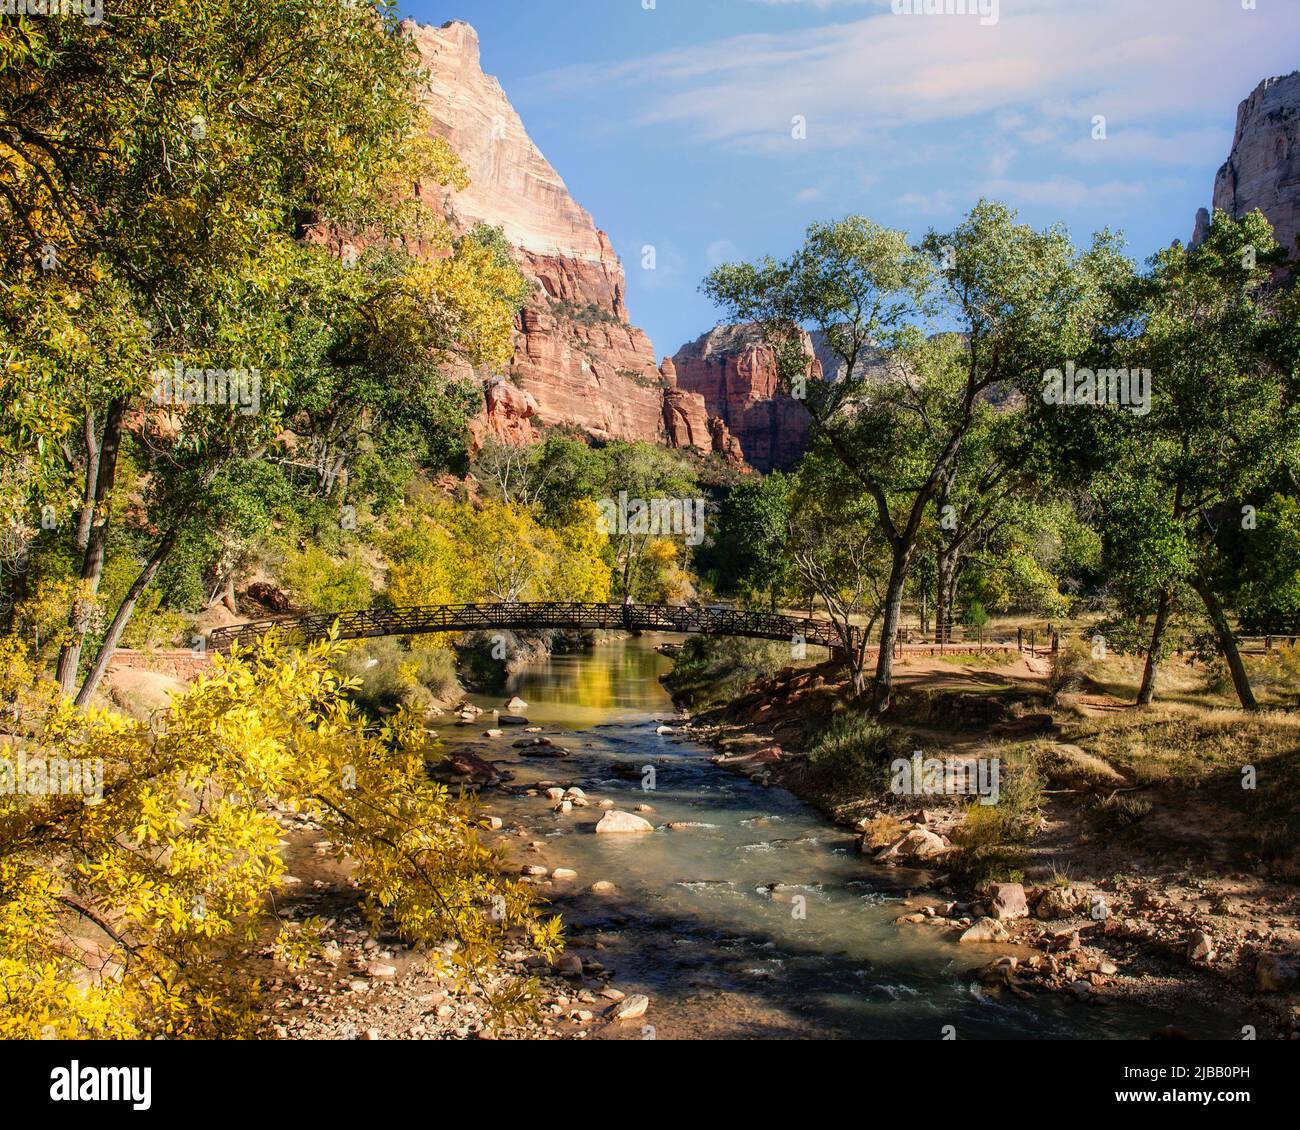 The Virgin River flows through the wide canyon of Zion National Park, Utah. Stock Photo